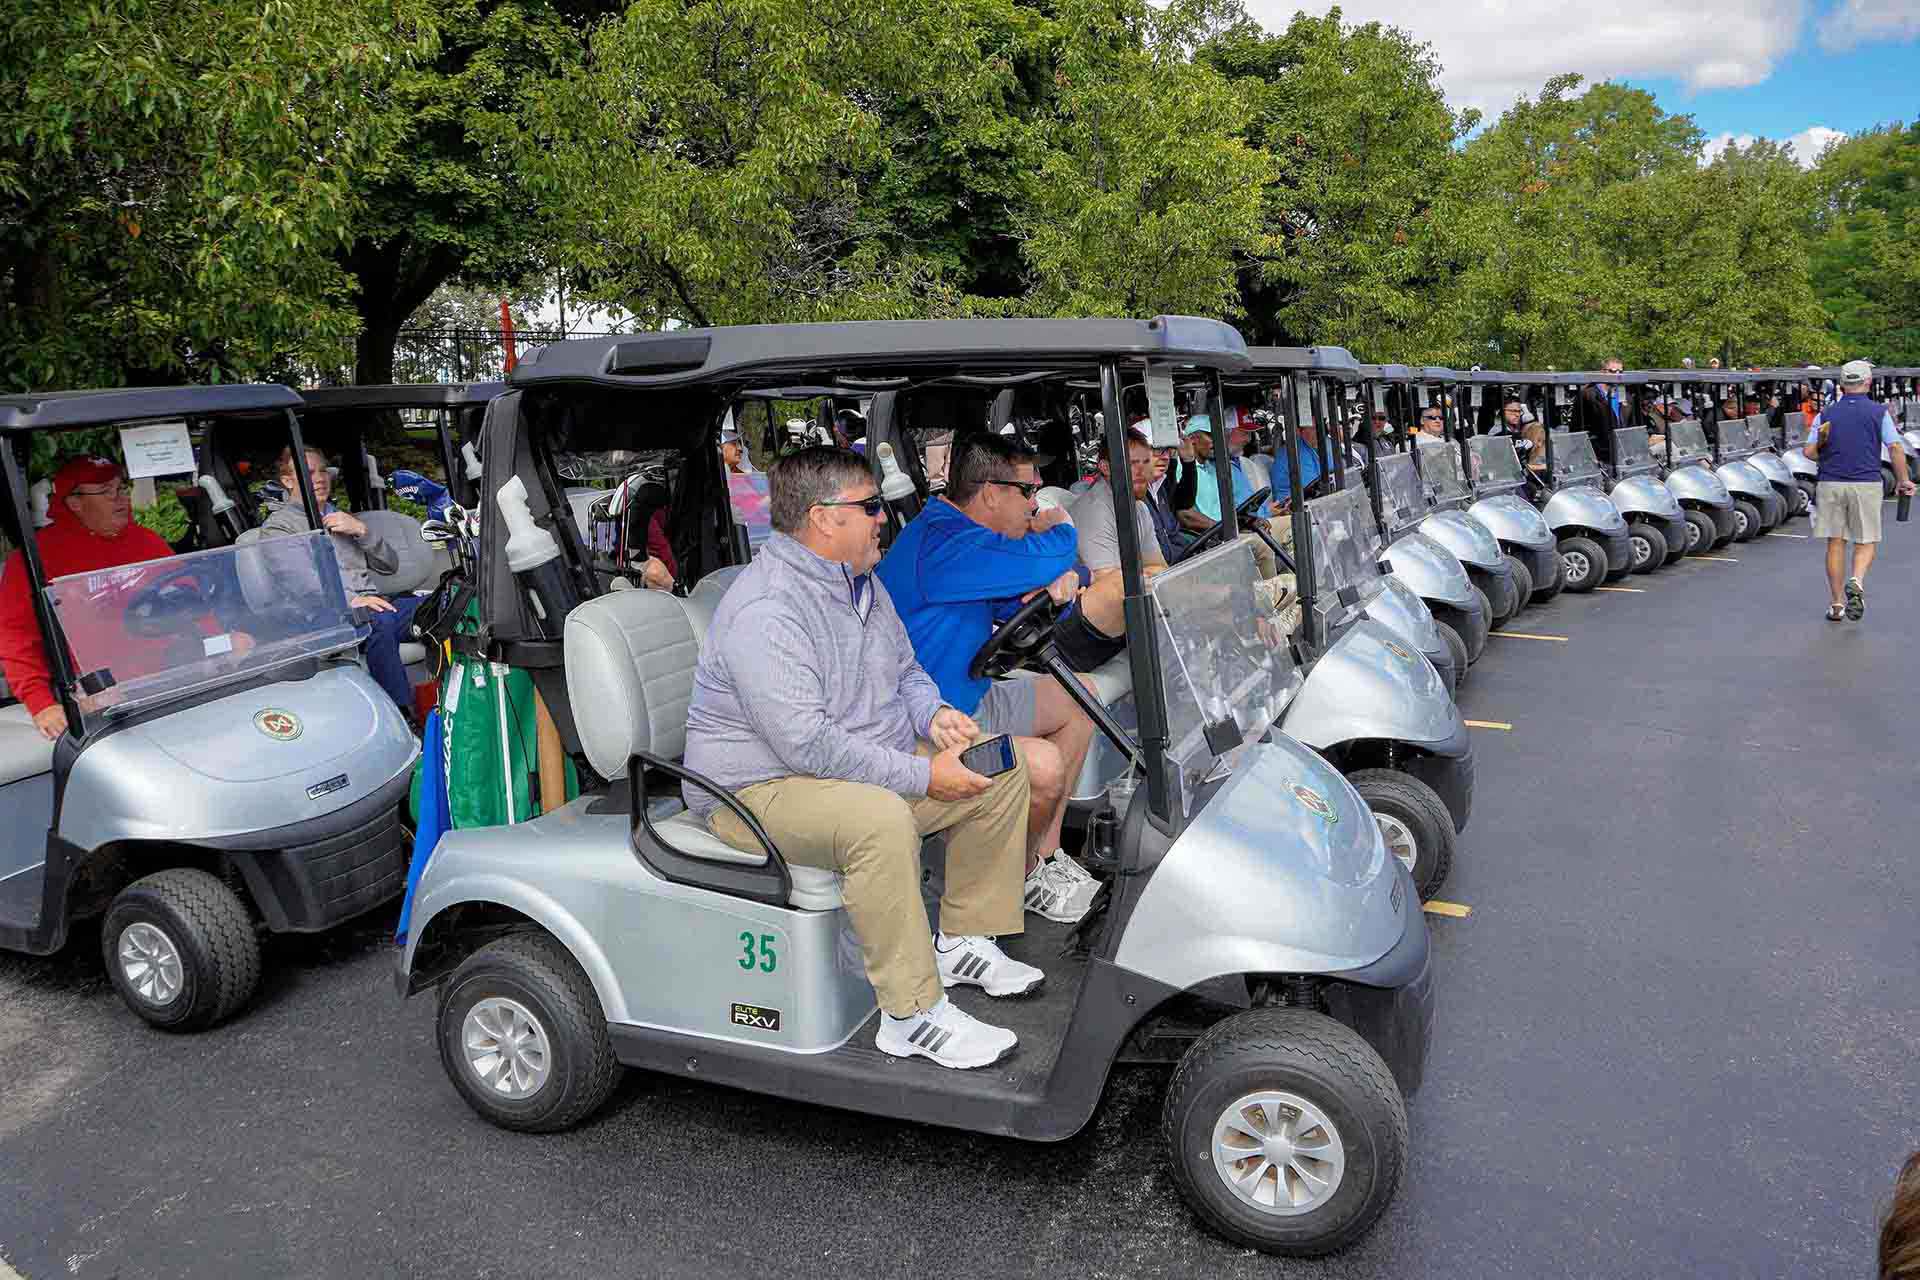 2020-endownment-classic-rows-of-golf-carts-with-people-in-them